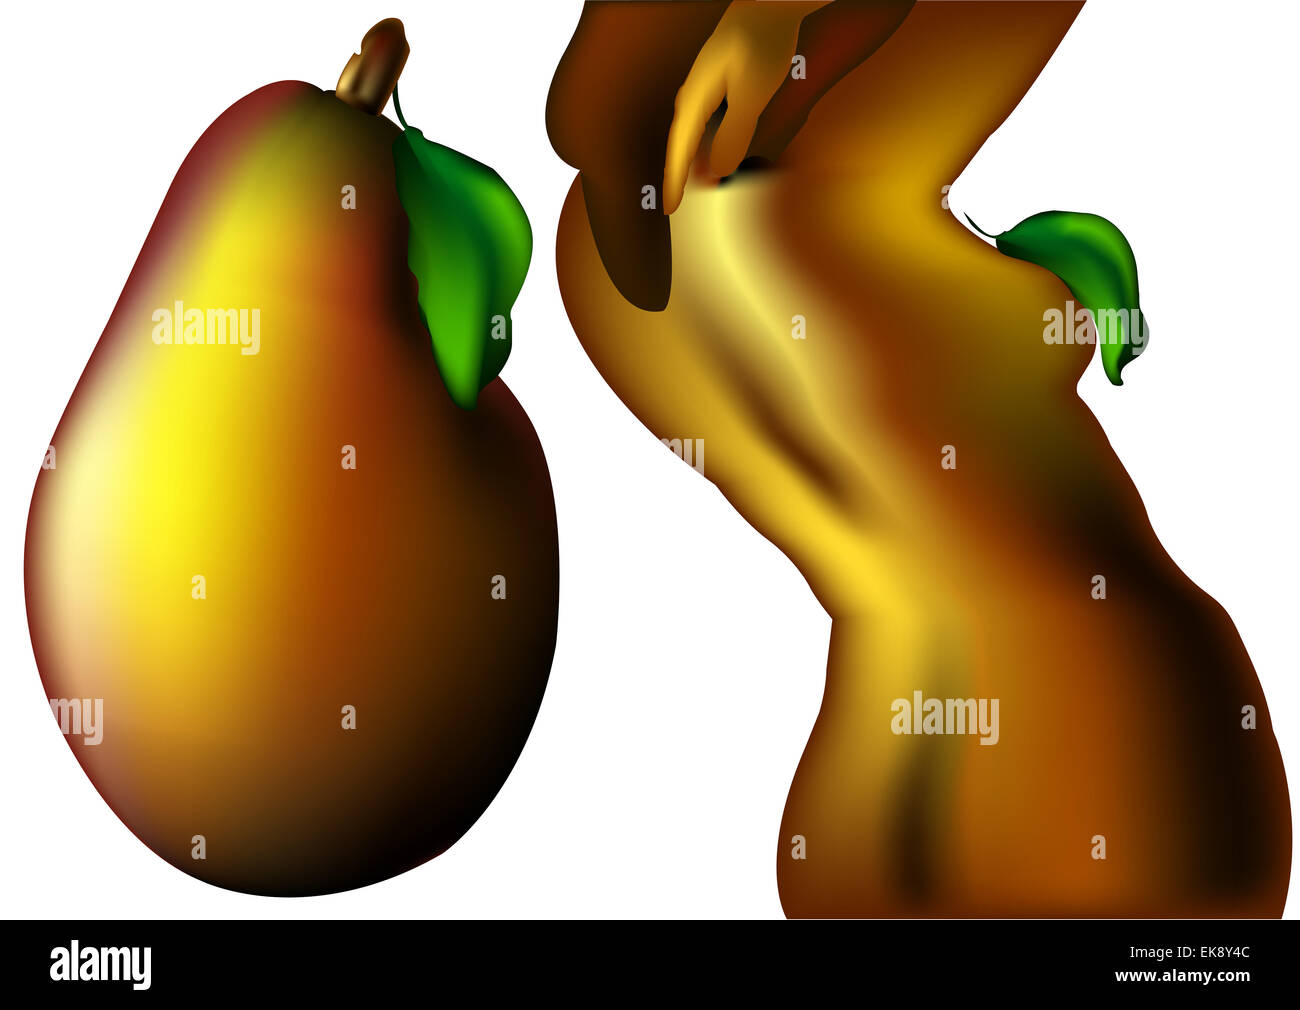 50,496 Pear Shaped Images, Stock Photos, 3D objects, & Vectors